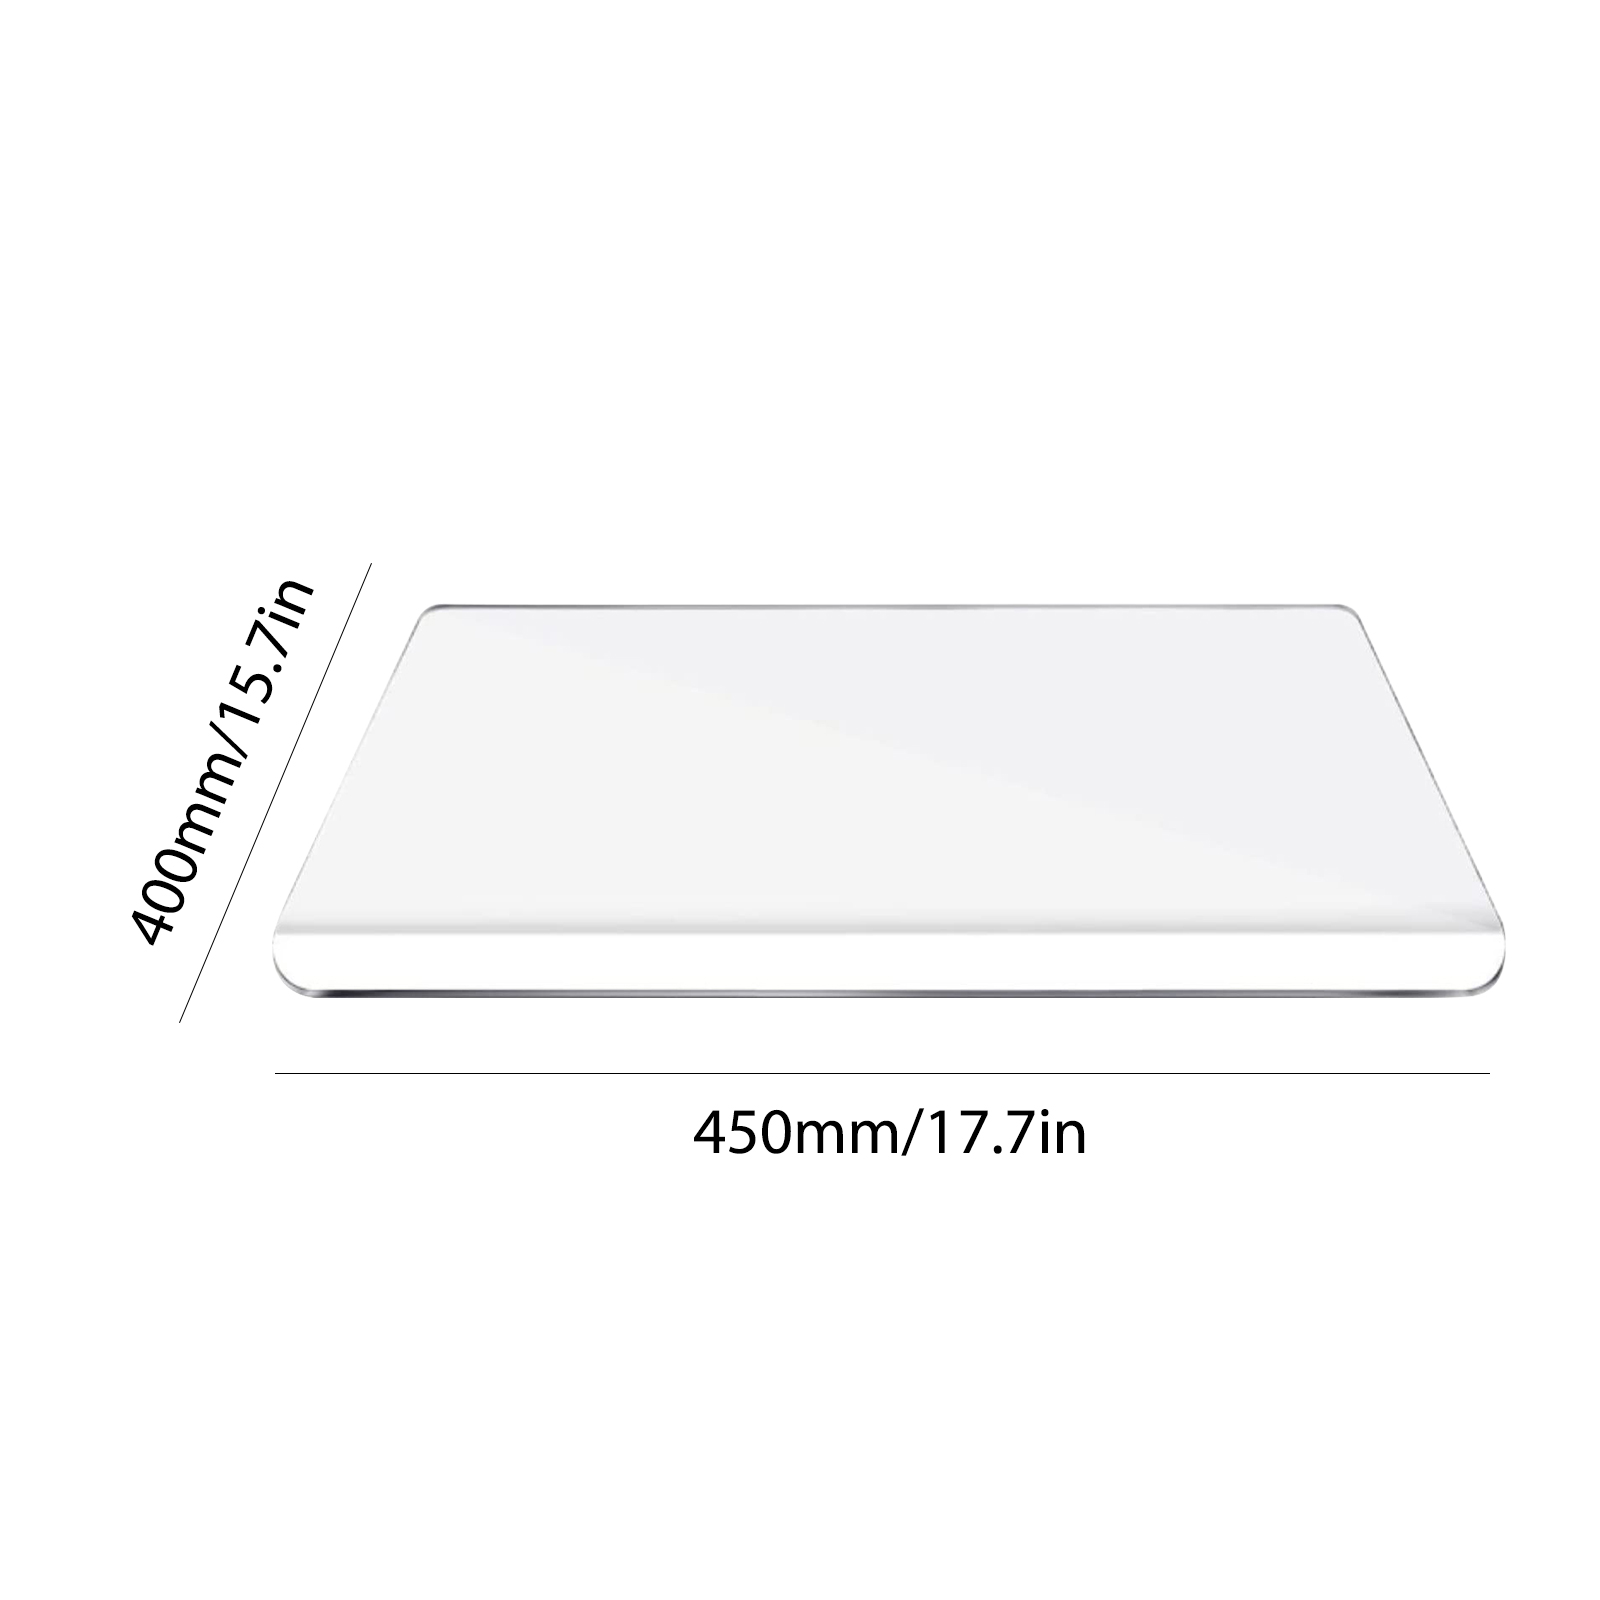 2 Pieces Acrylic, Clear Chopping Board Non Slip Cutting Boards for Kitchen